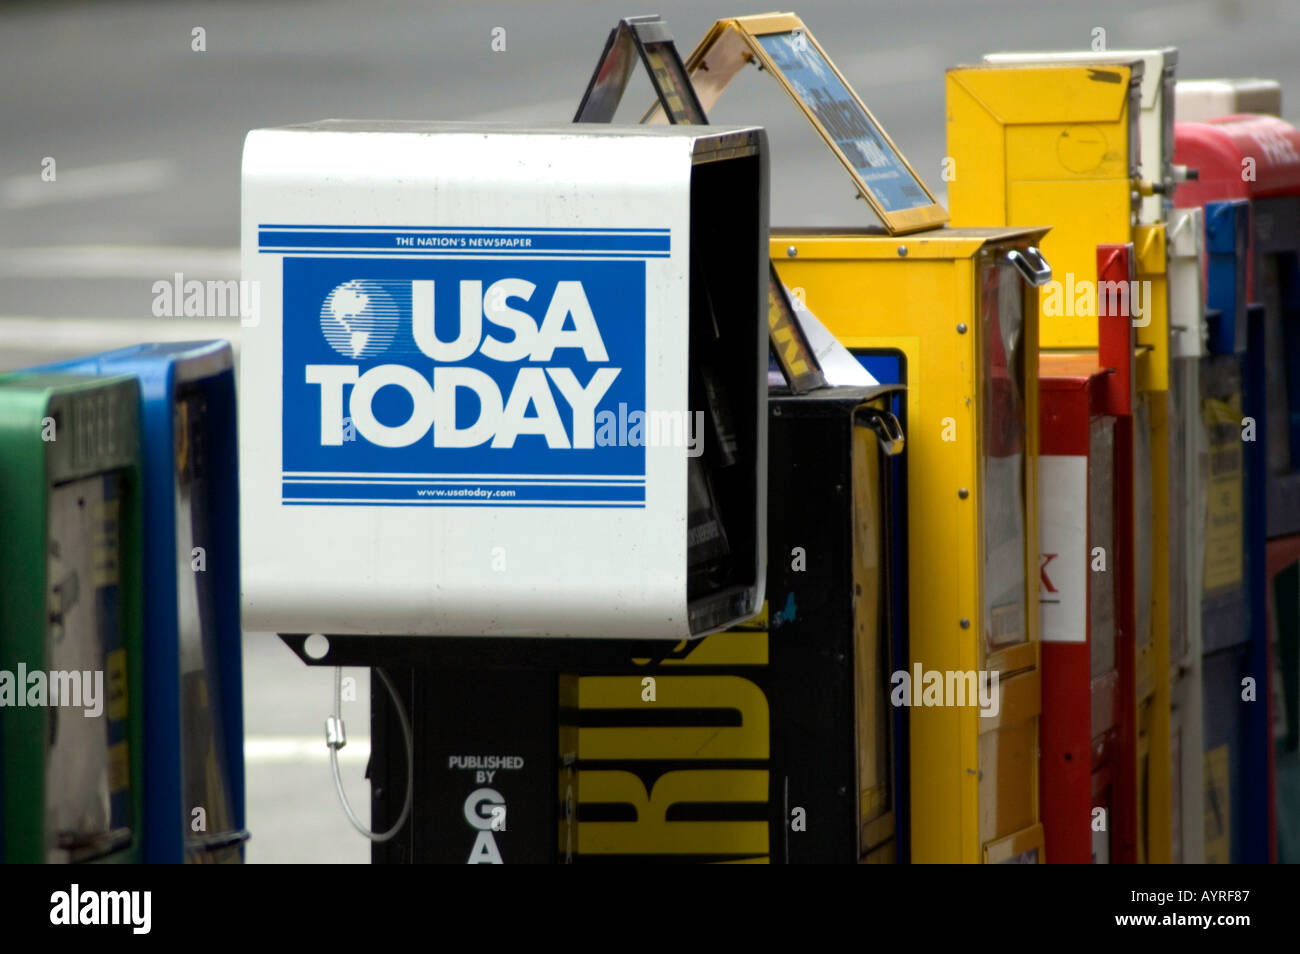 Distributeur de journaux USA TODAY SAN FRANCISCO CALIFORNIA UNITED STATES OF AMERICA USA Banque D'Images